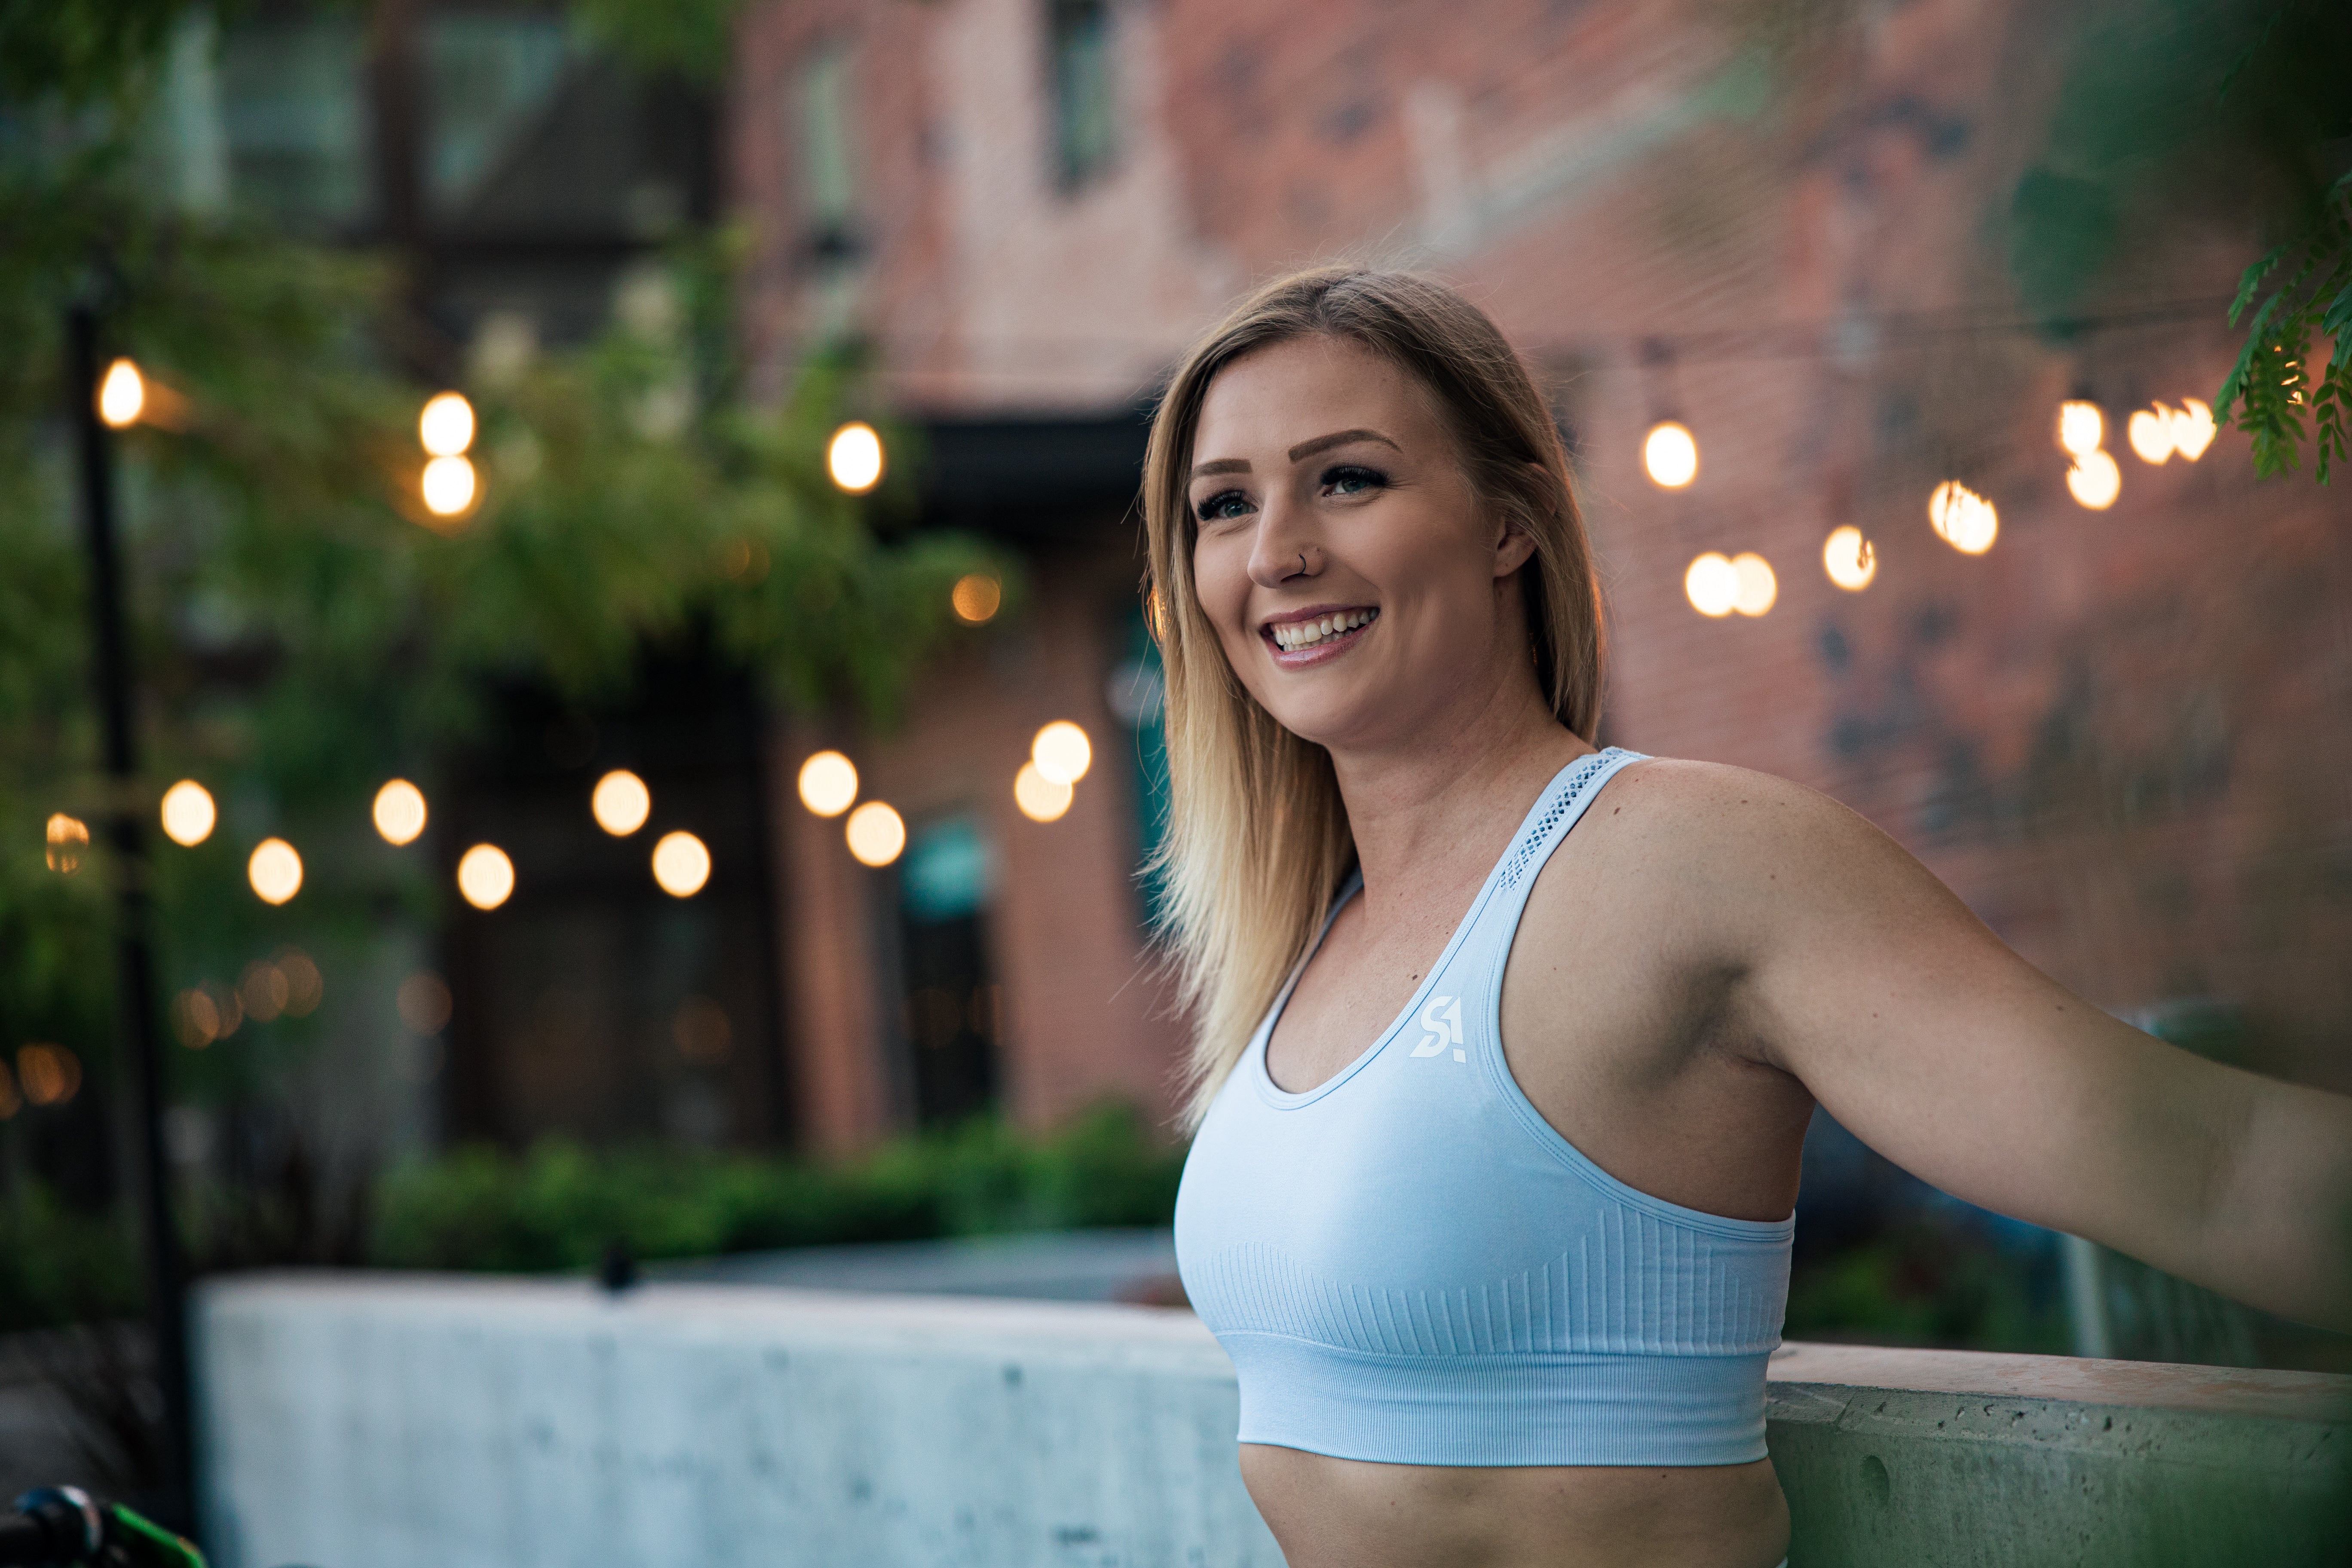 Hooded Sports Bra - Blue by NUMBAT